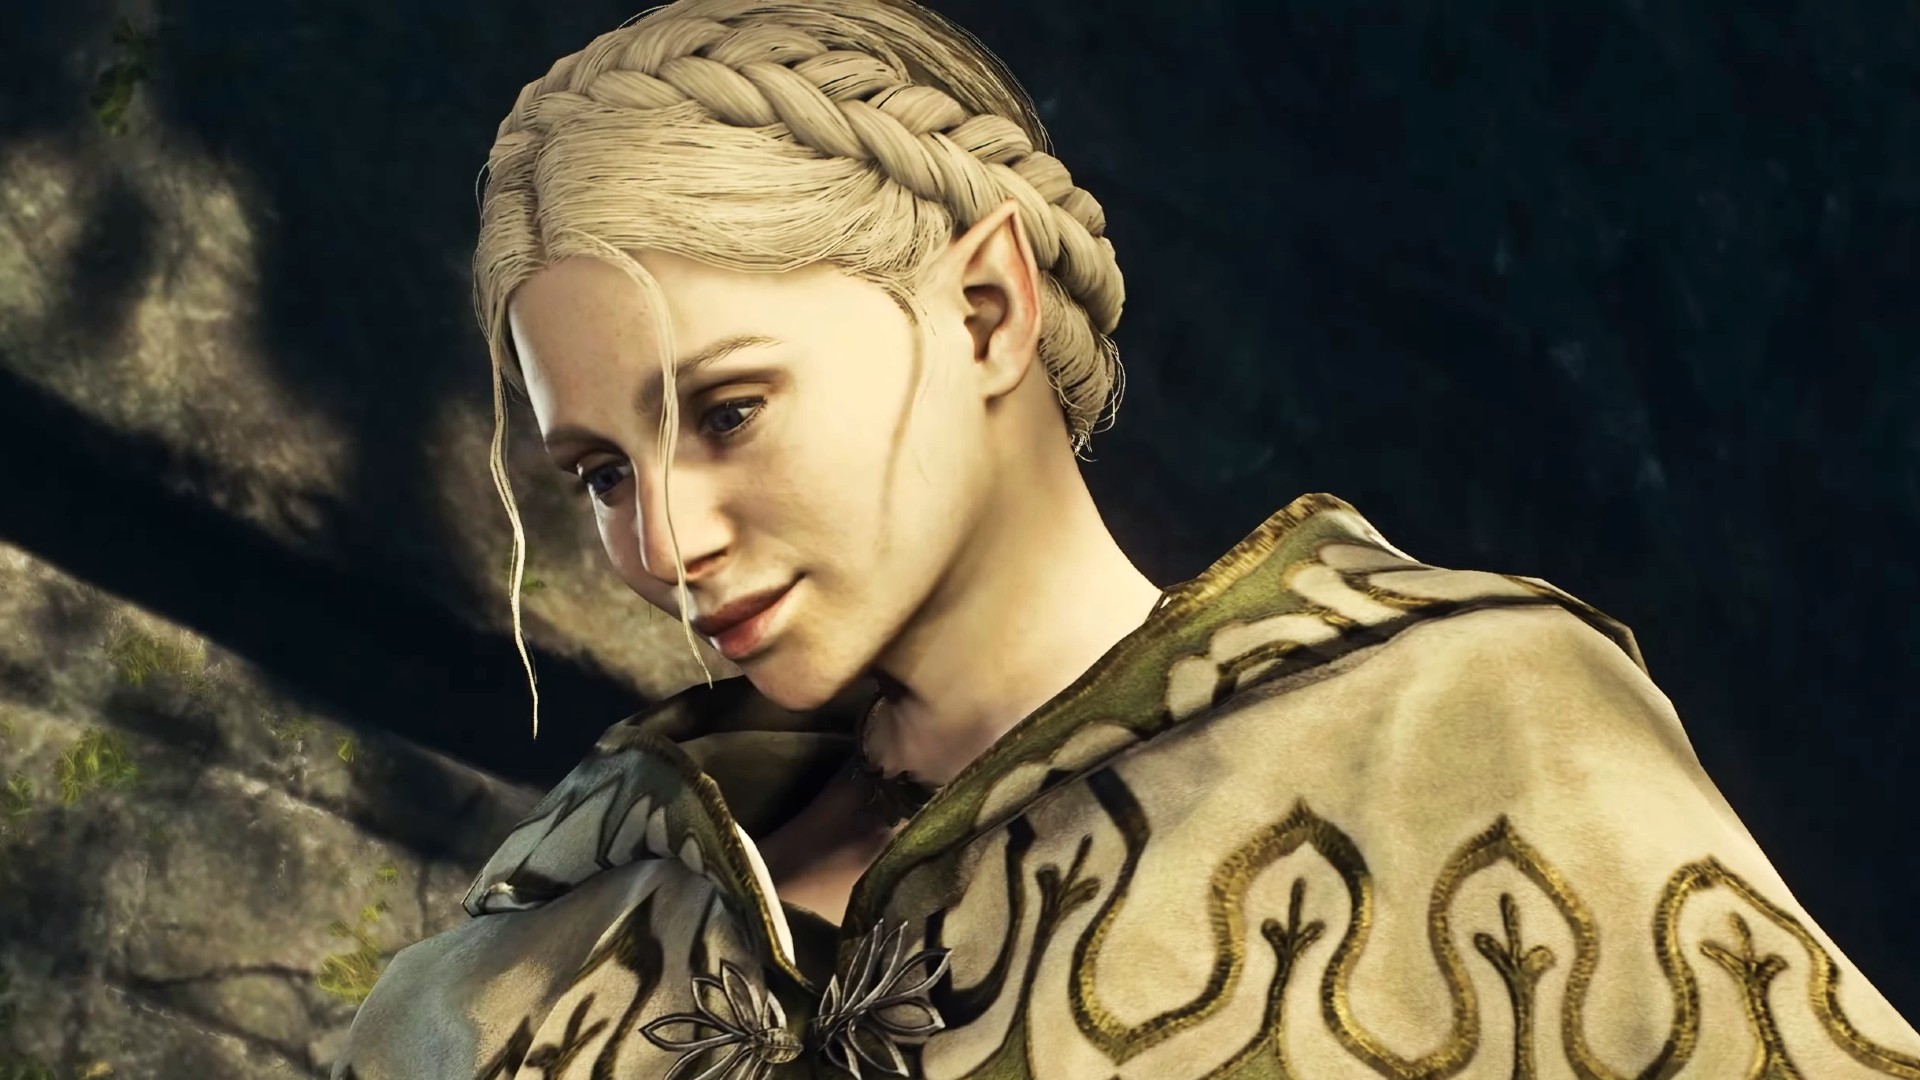 Does Dragon's Dogma 2 have multiplayer co-op?